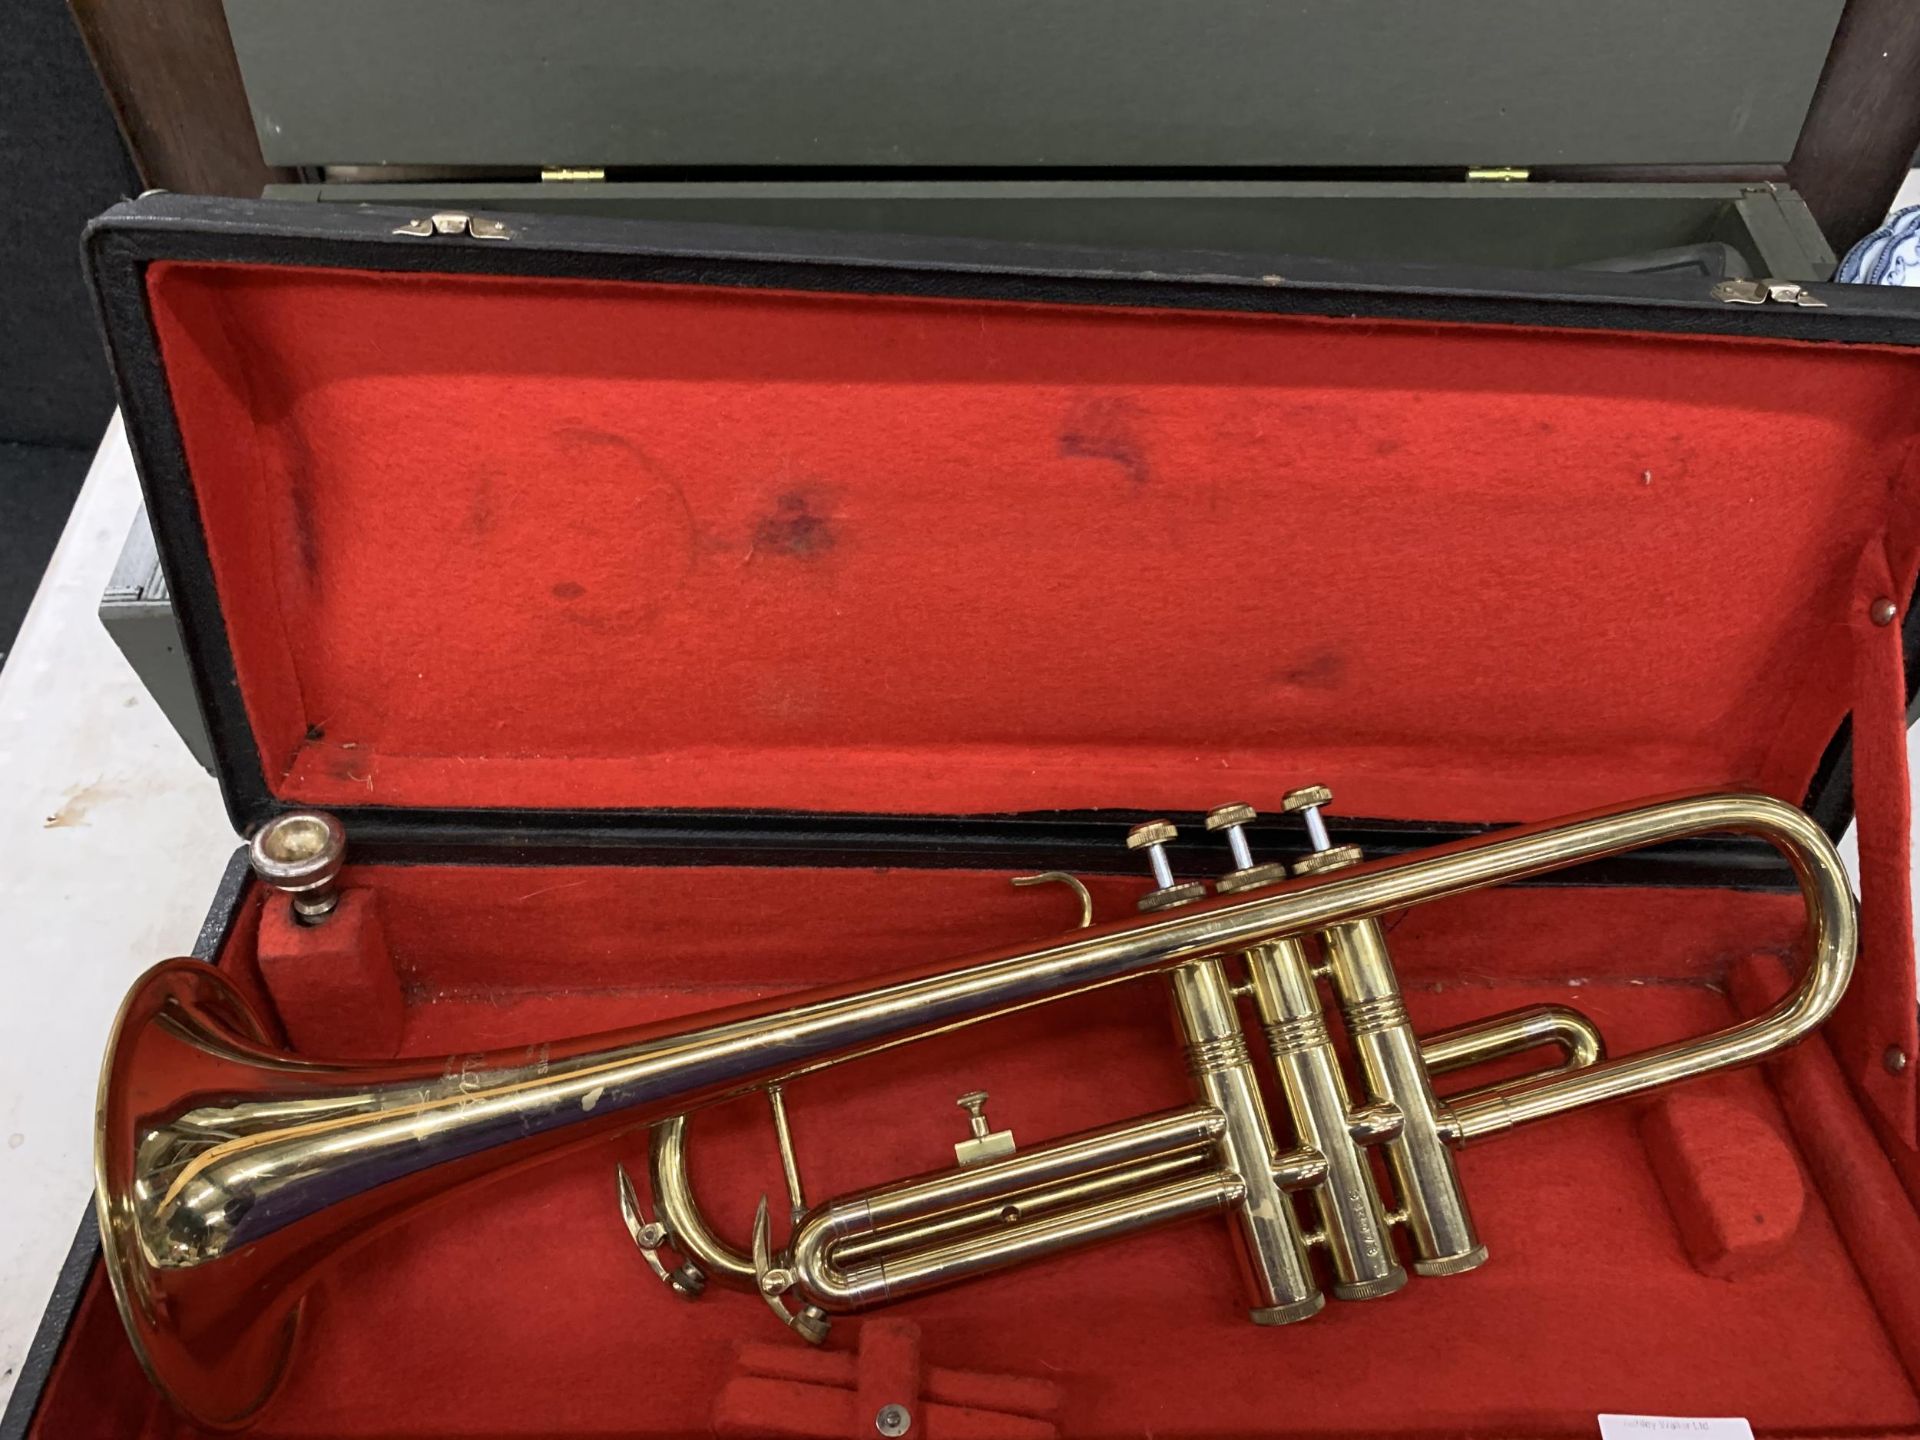 A ROSE MORRIS LONDON KANSAS BRASS TRUMPET WITH MOUTH PIECE IN A FITTED CASE - Image 2 of 2